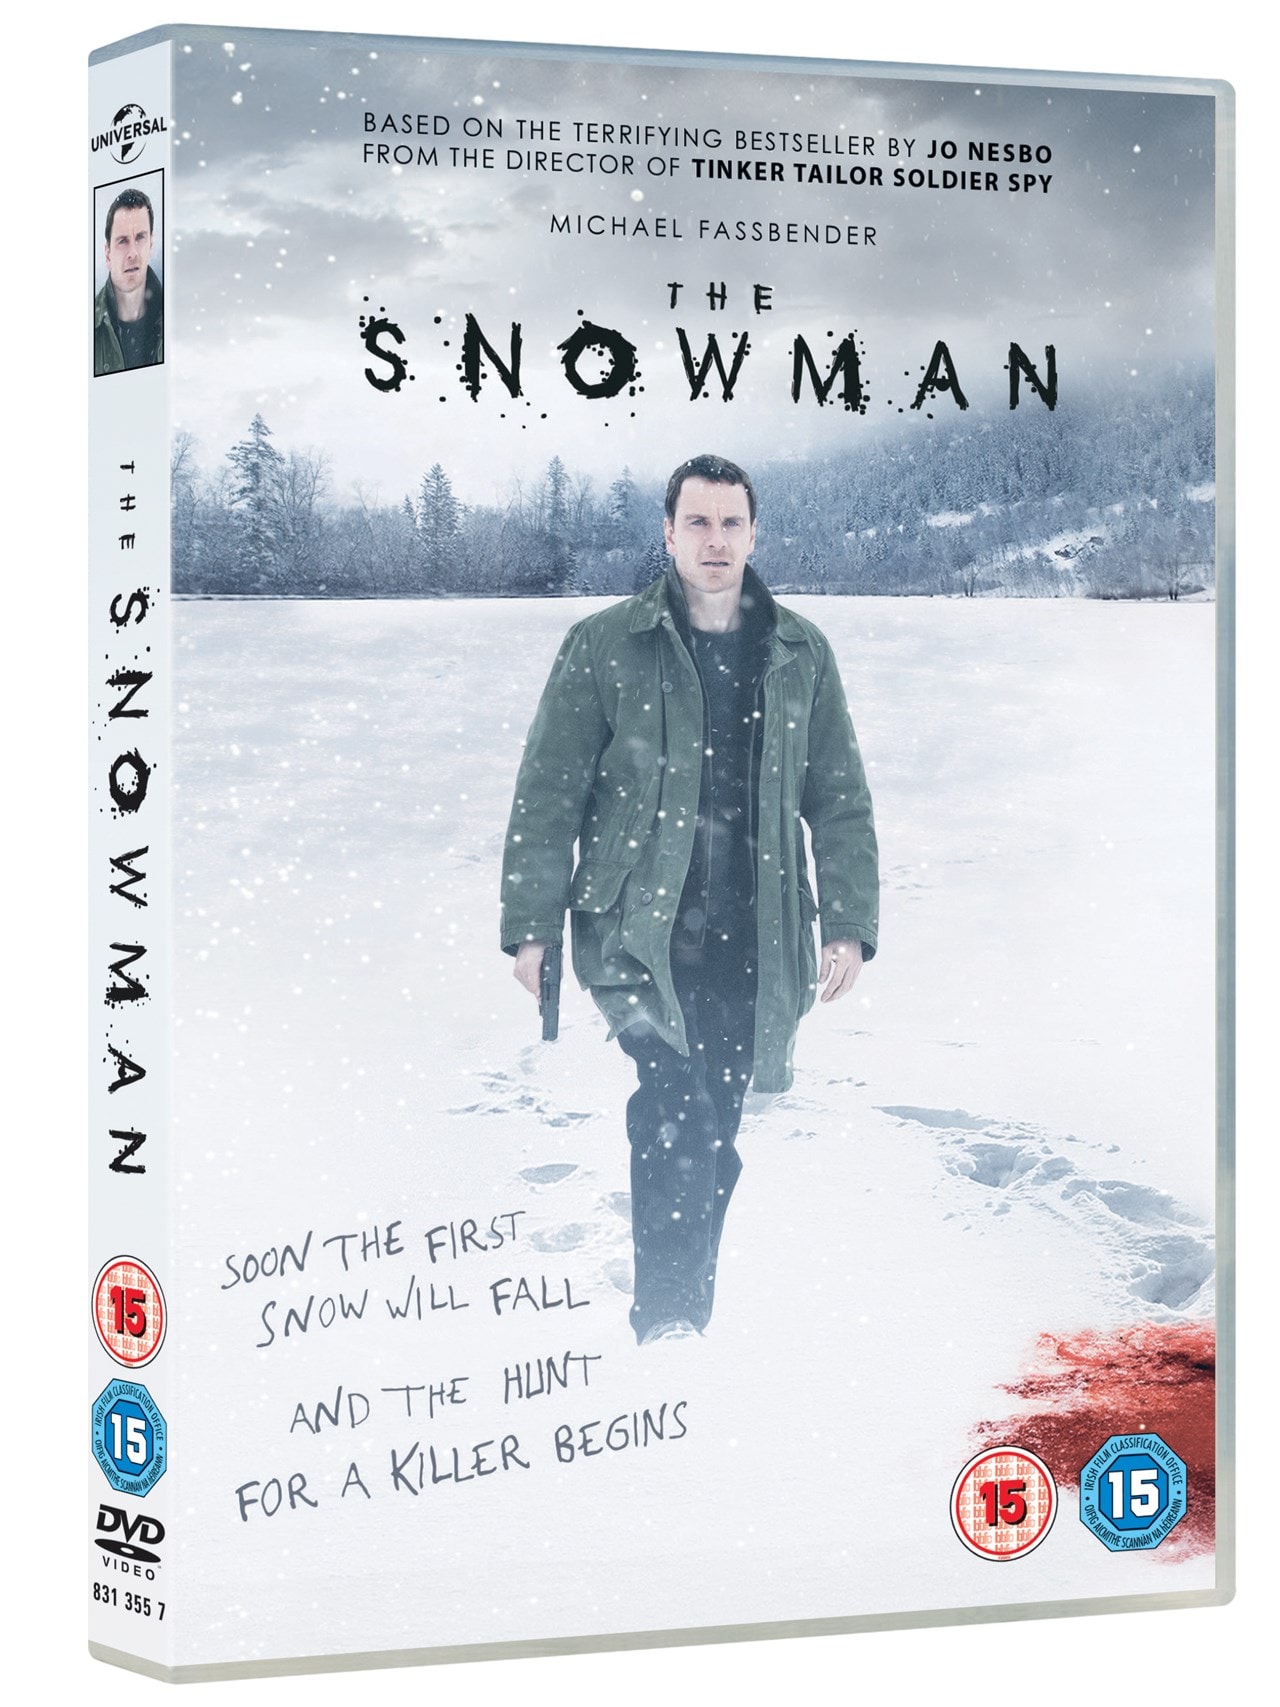 The Snowman | DVD | Free shipping over £20 | HMV Store